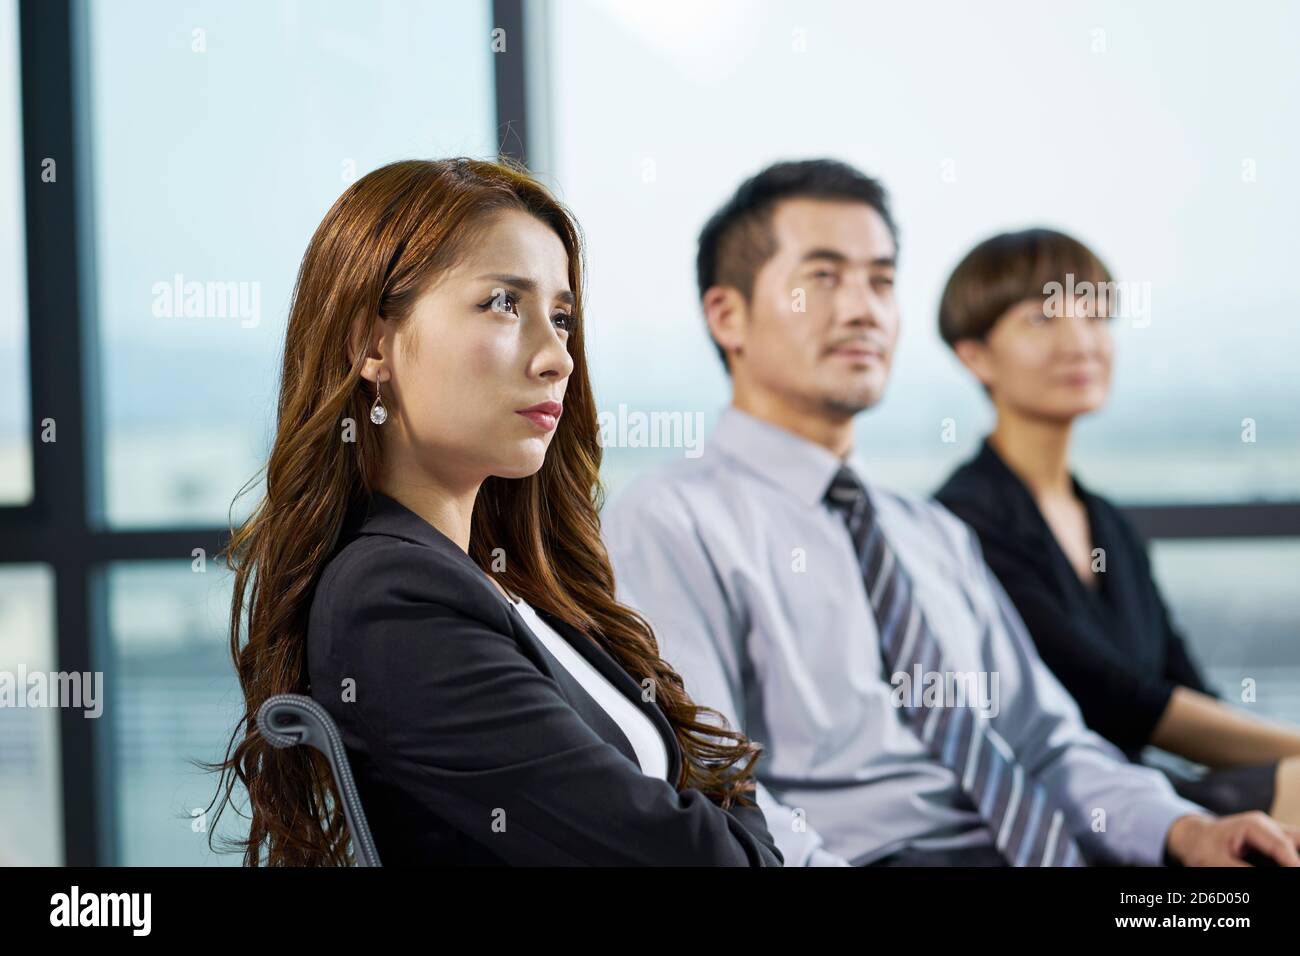 asian corporate executives listening attentively during presentation or training Stock Photo